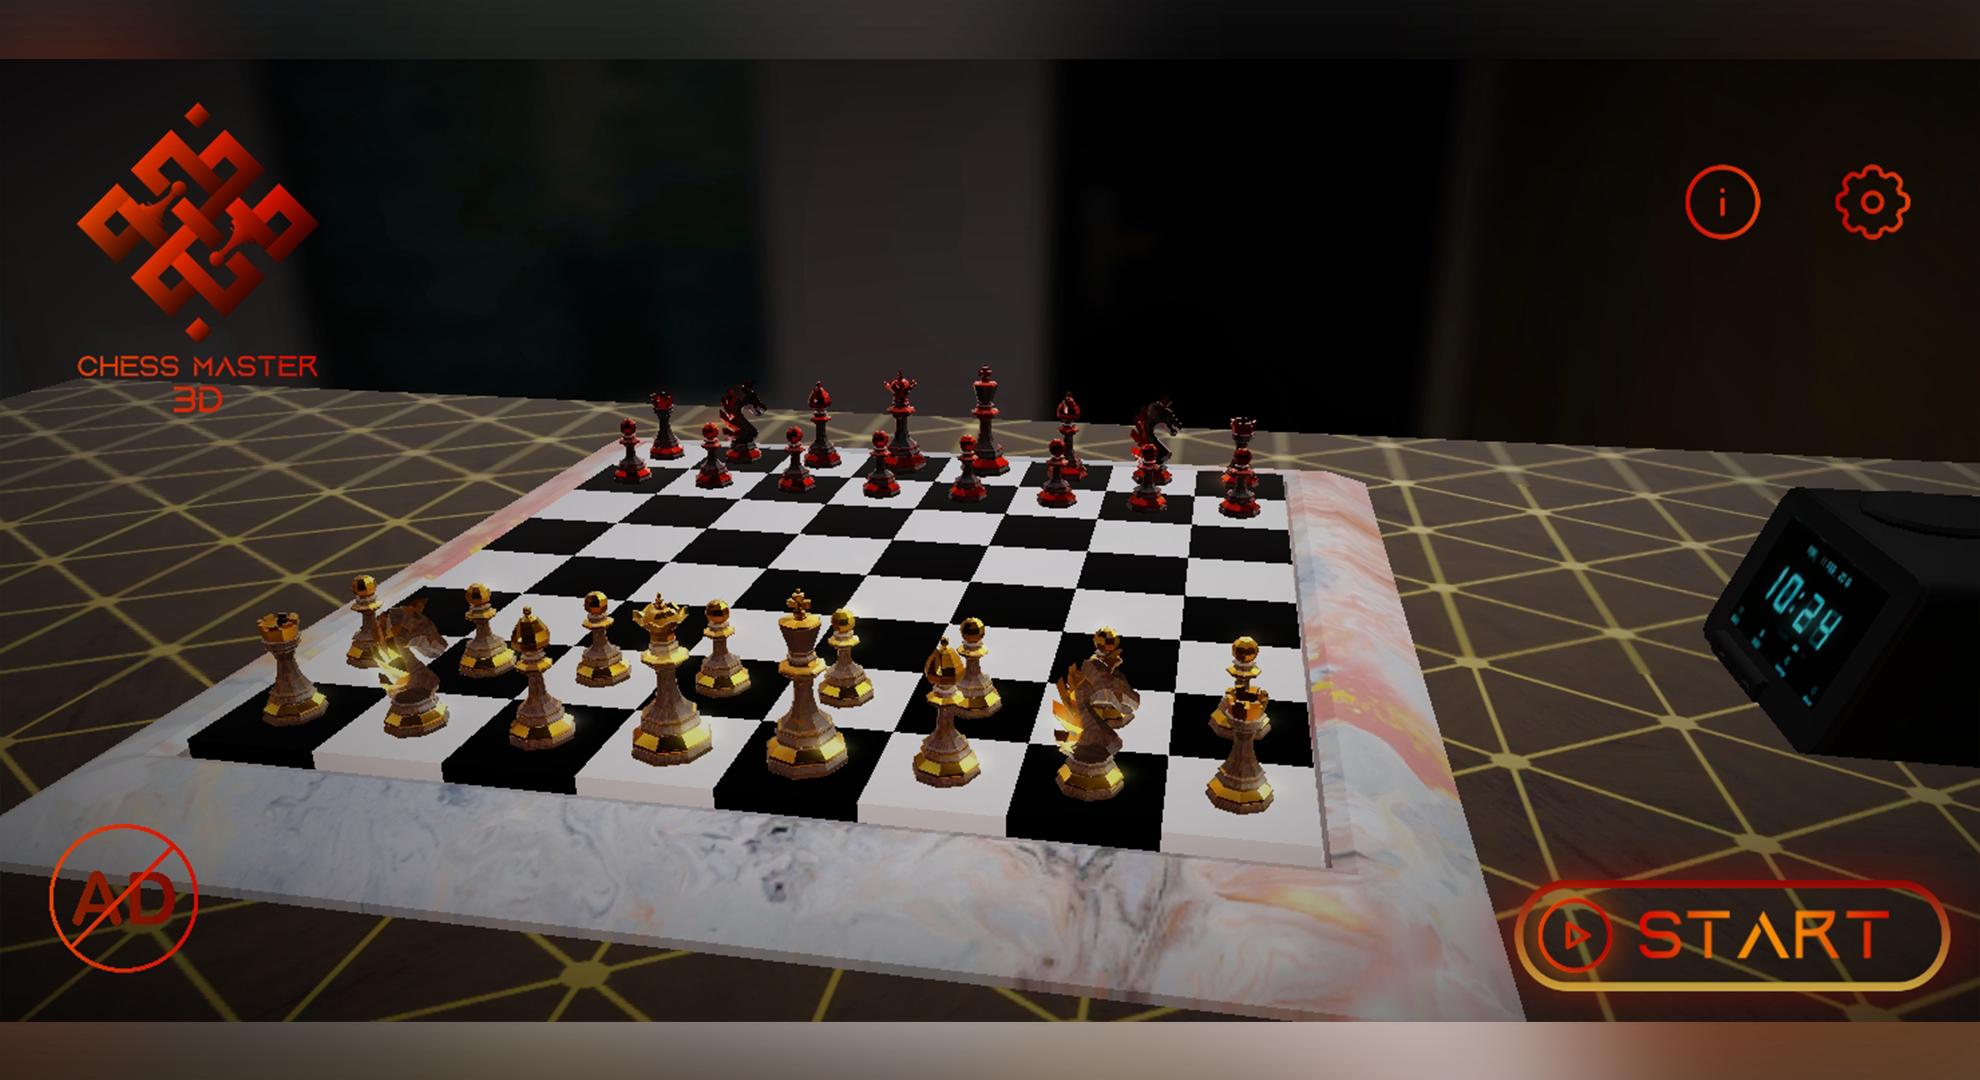 Master Chess Multiplayer - Free Play & No Download